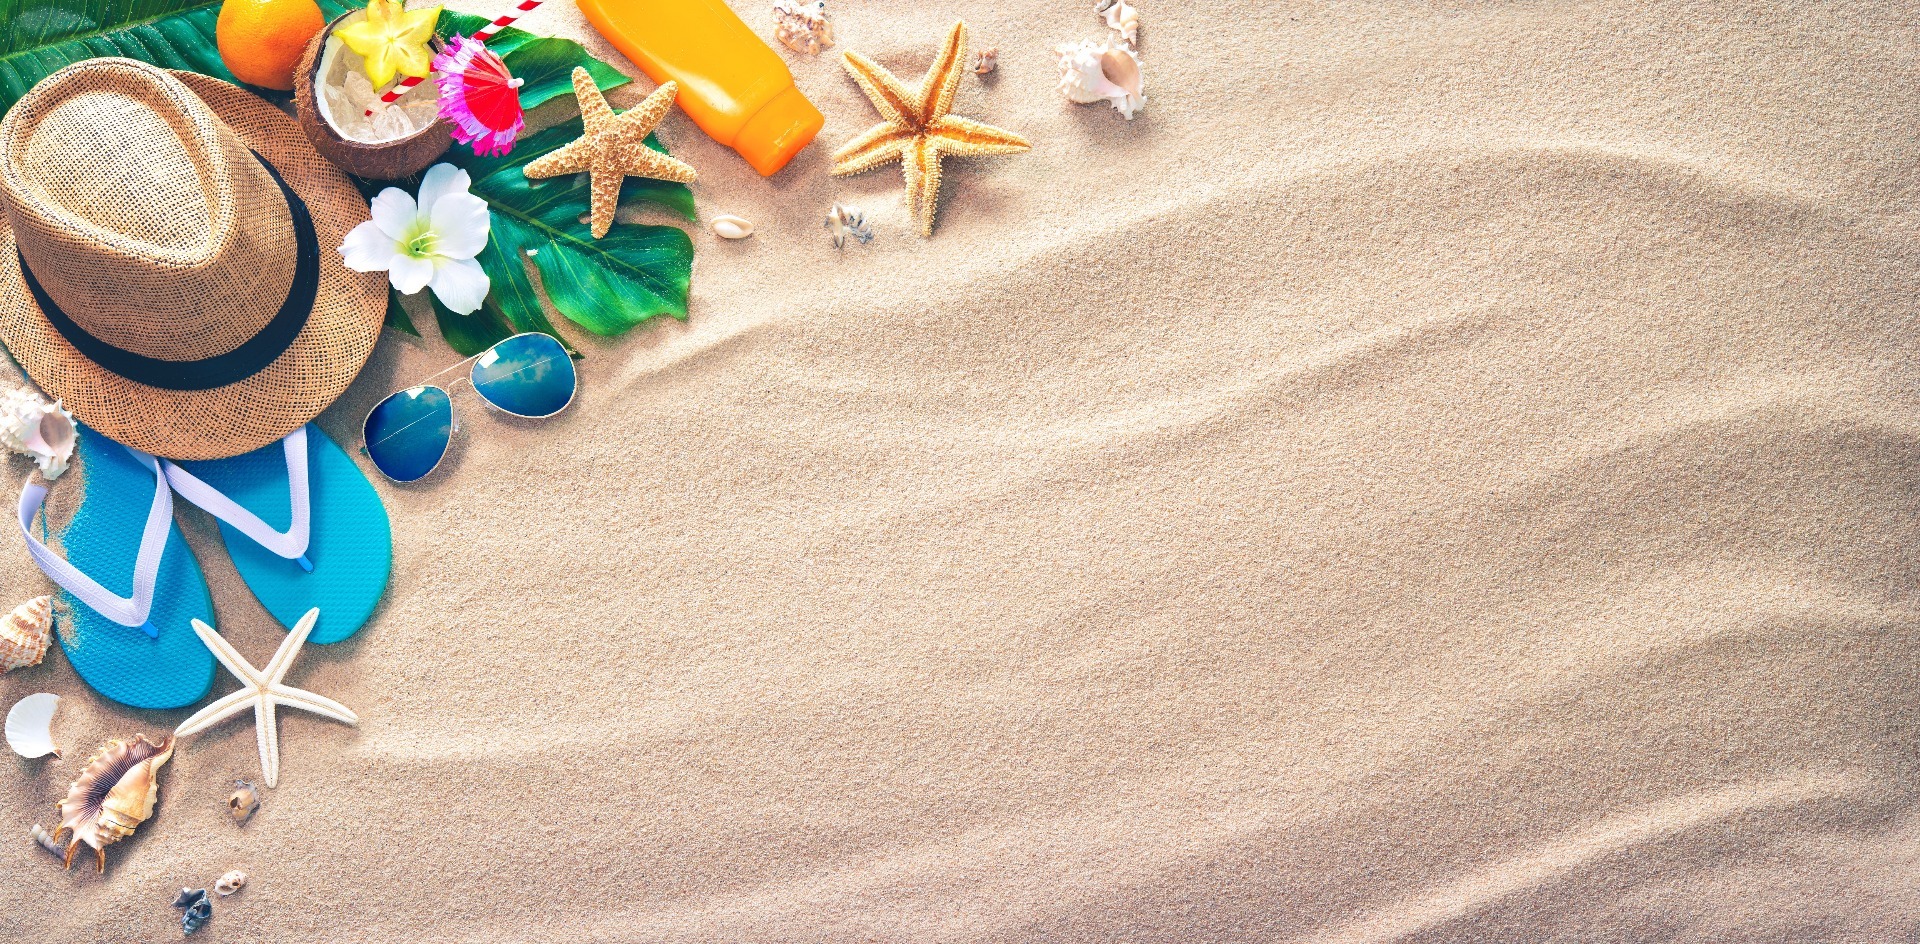 A beach, with beach-items including flip flops, a hat, sunglasses, seashells and a bottle of suncream.